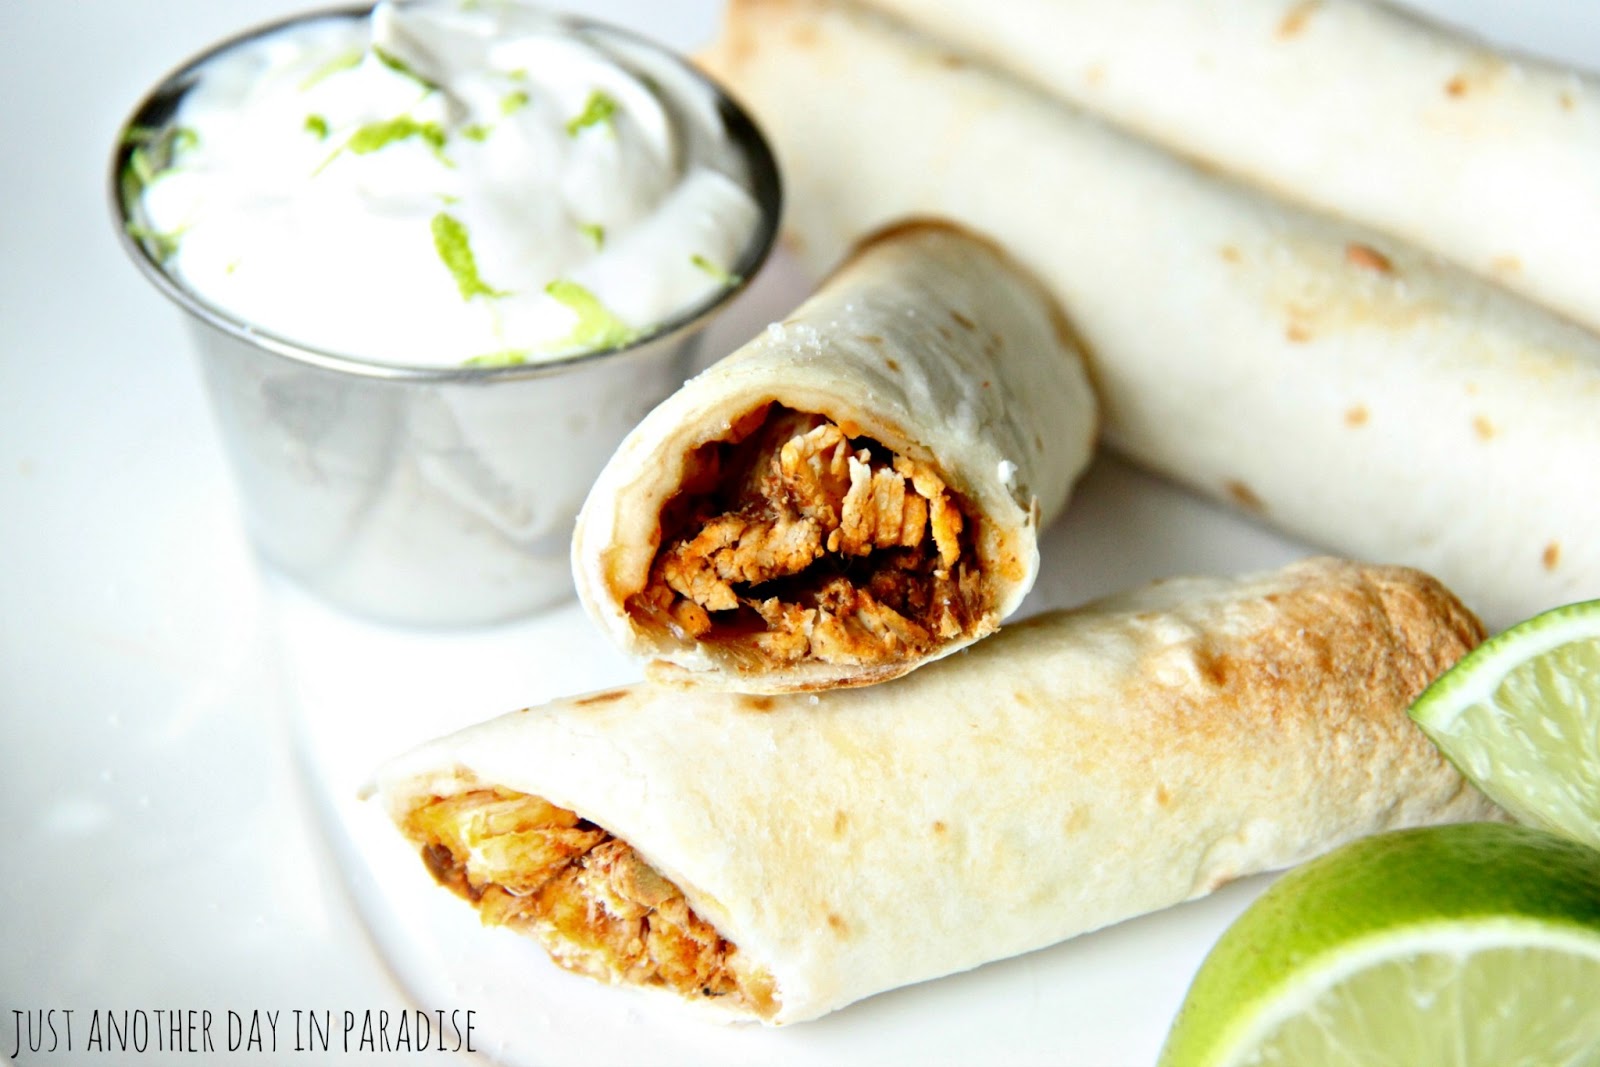 Larissa Another Day: Baked Chipotle Chicken Taquitos